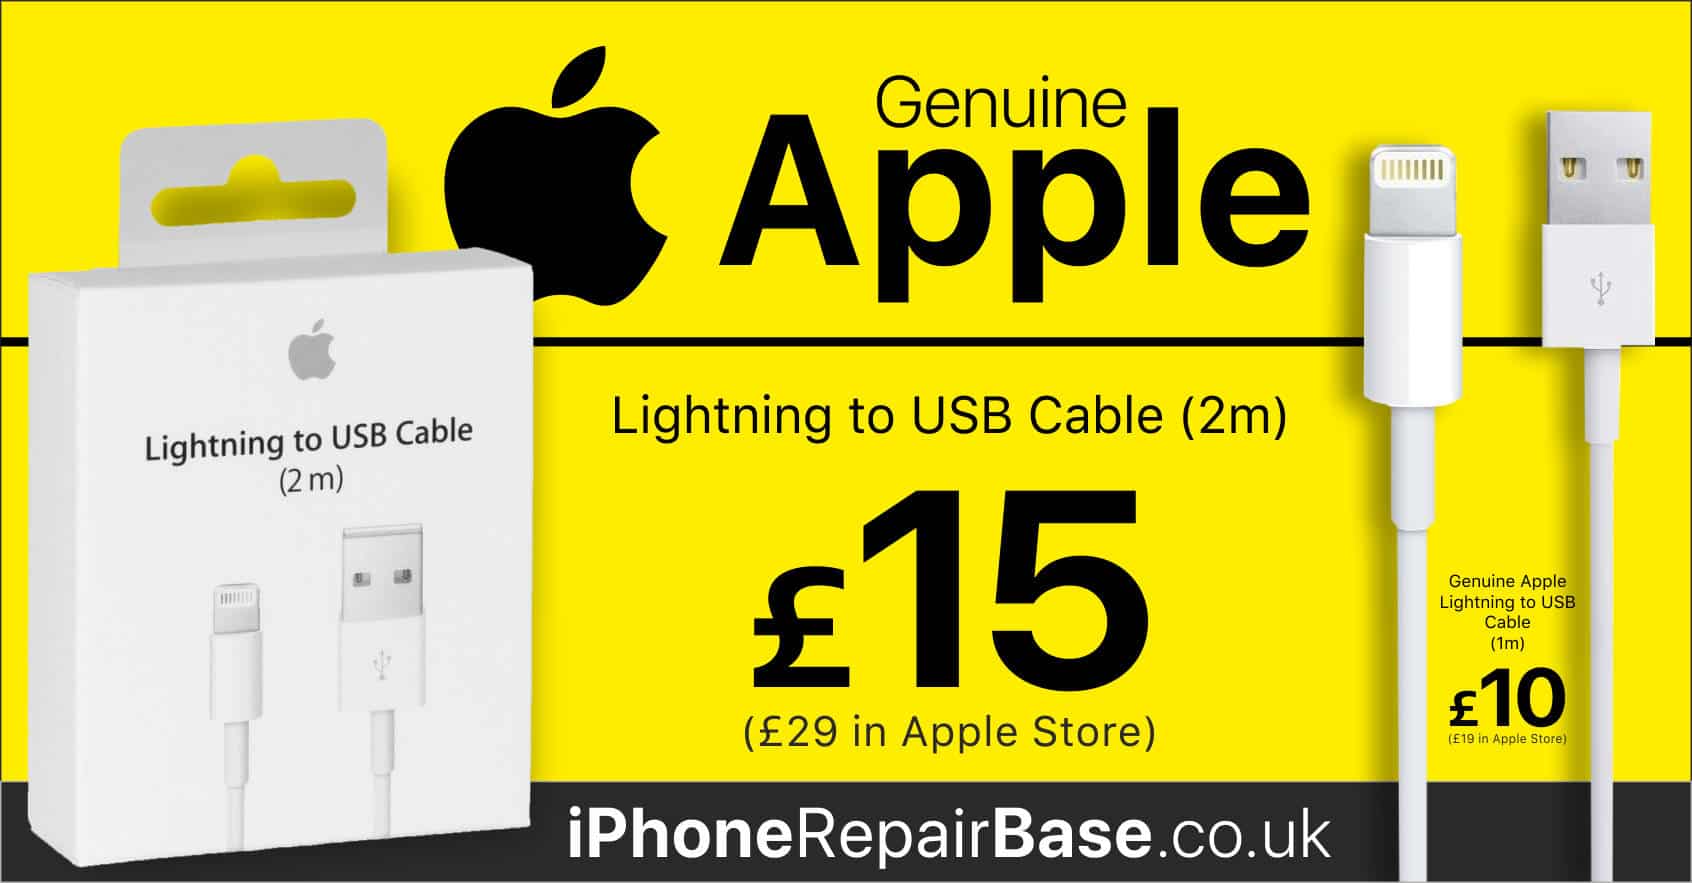 Genuine Apple Lightning to USB Cable (2m) - iPhone Repair Base